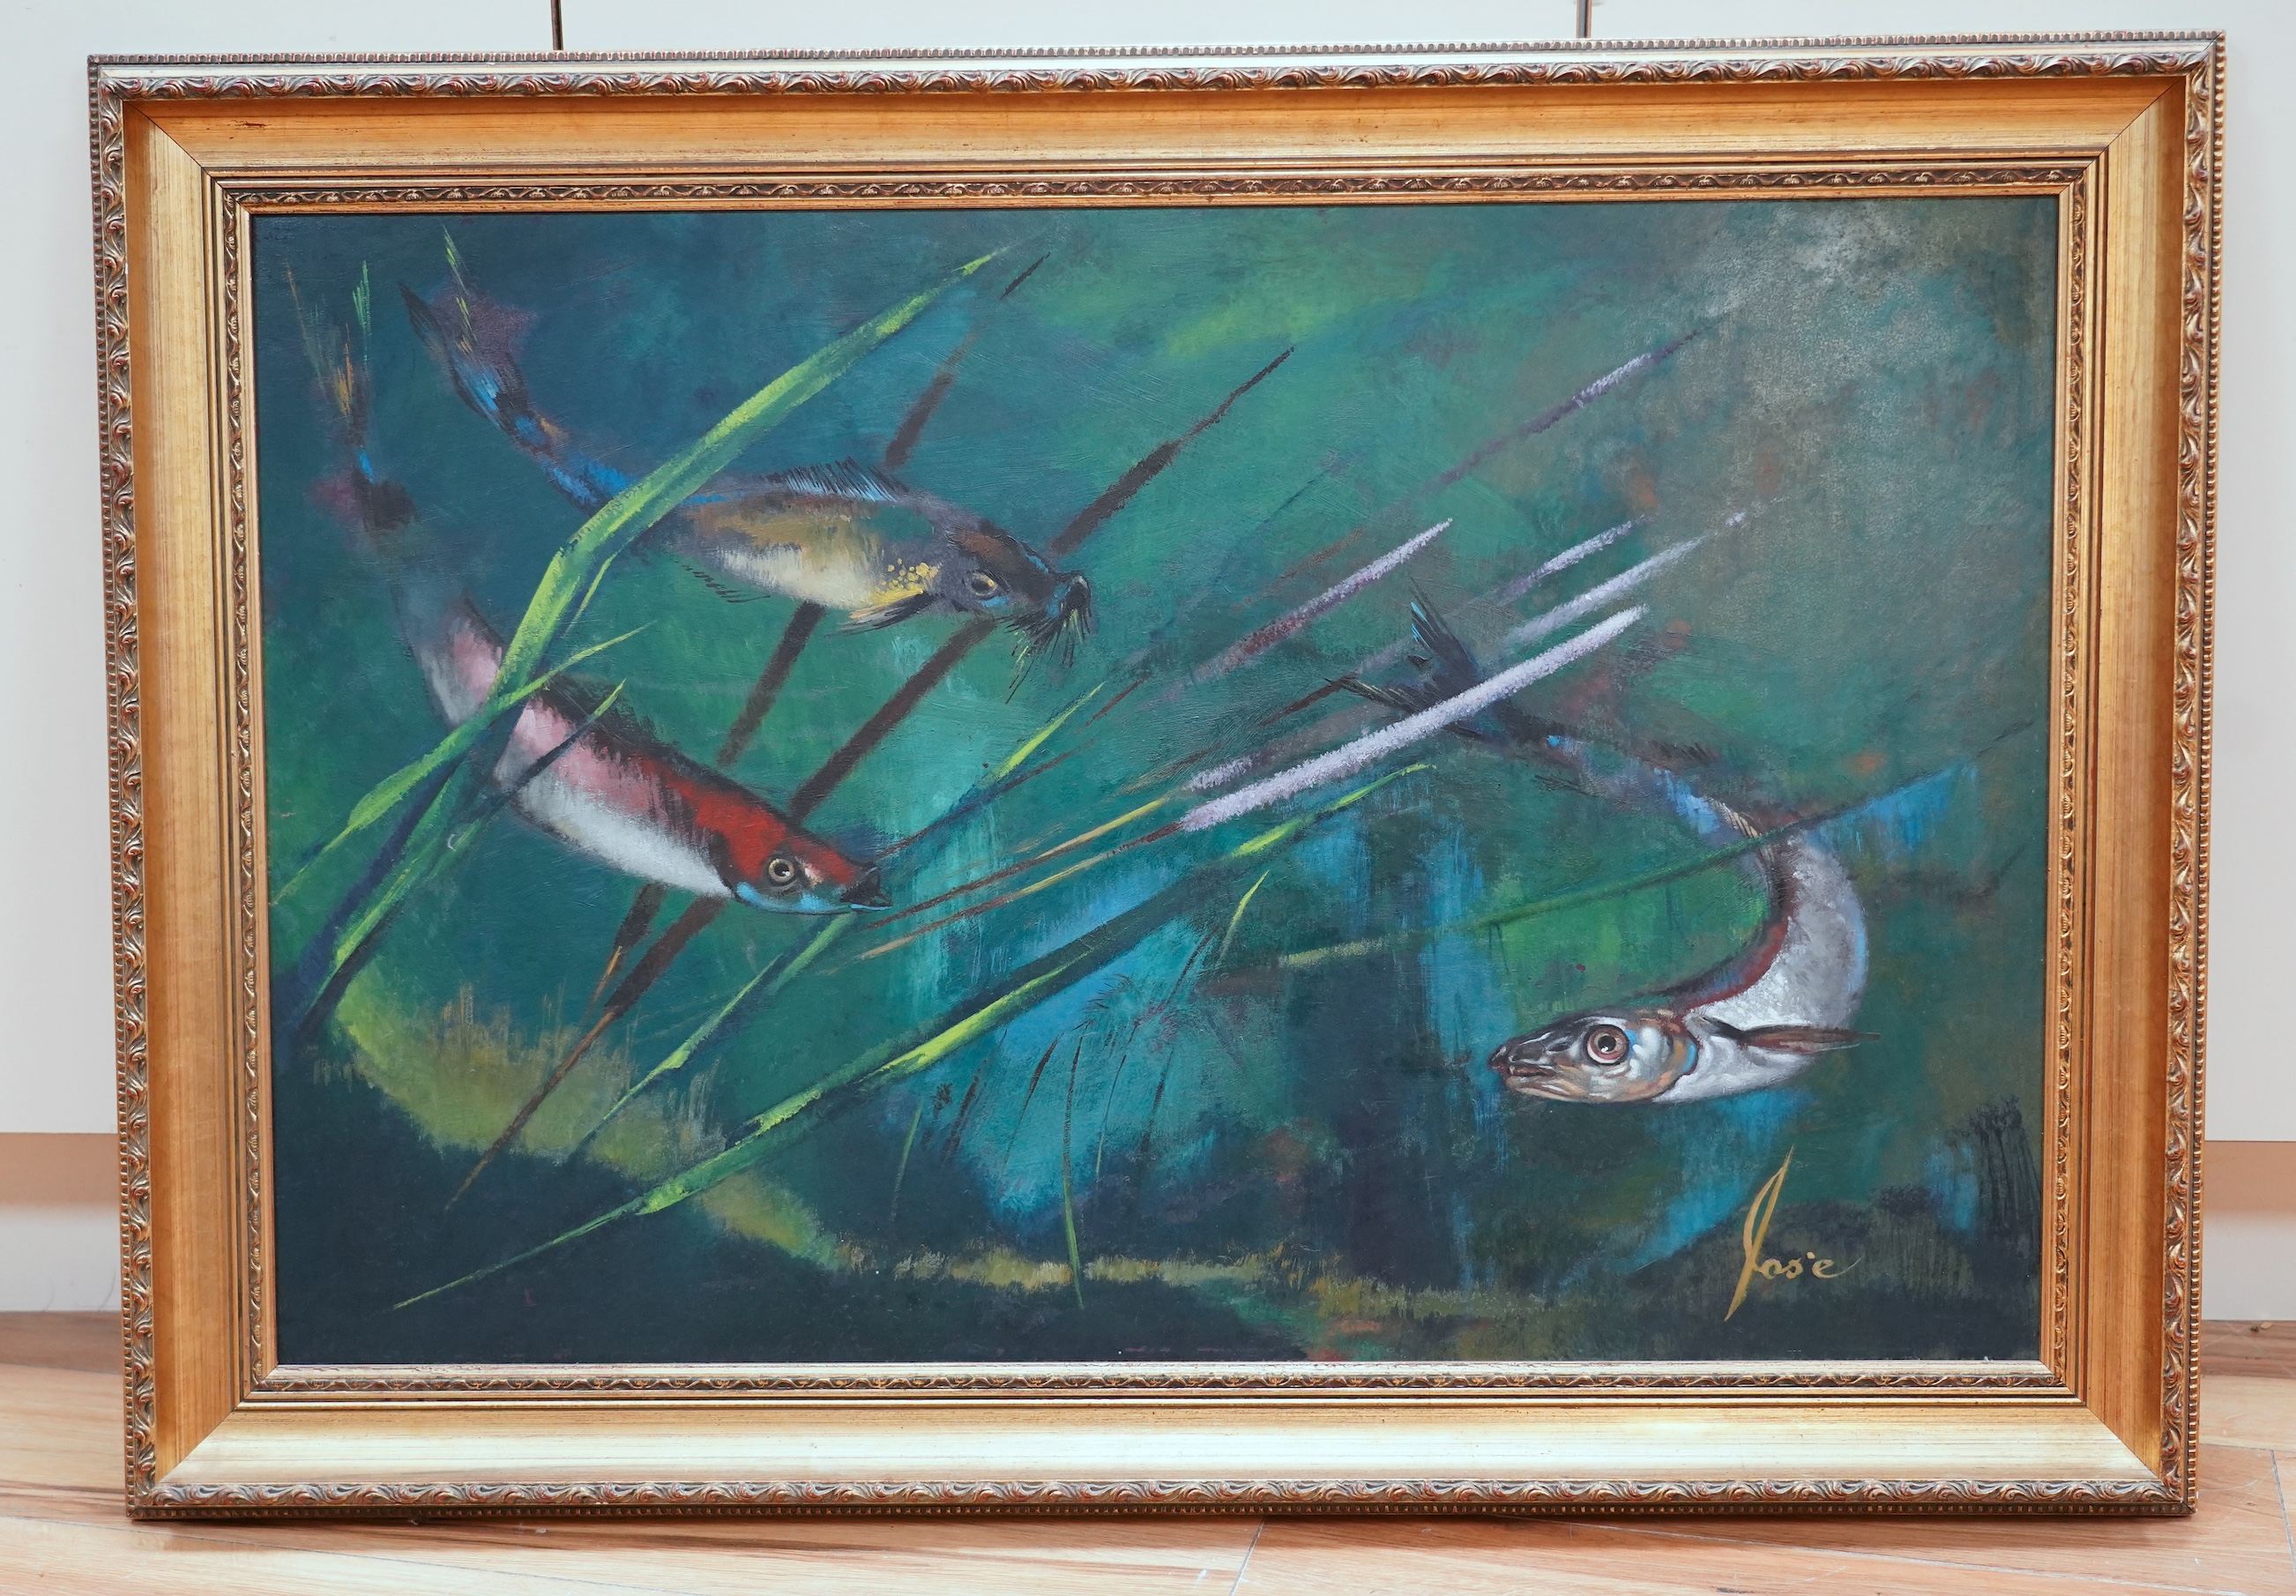 José (Late 20th. C), oil on board, Study of fish, signed, 56 x 87cm, gilt framed. Condition - good